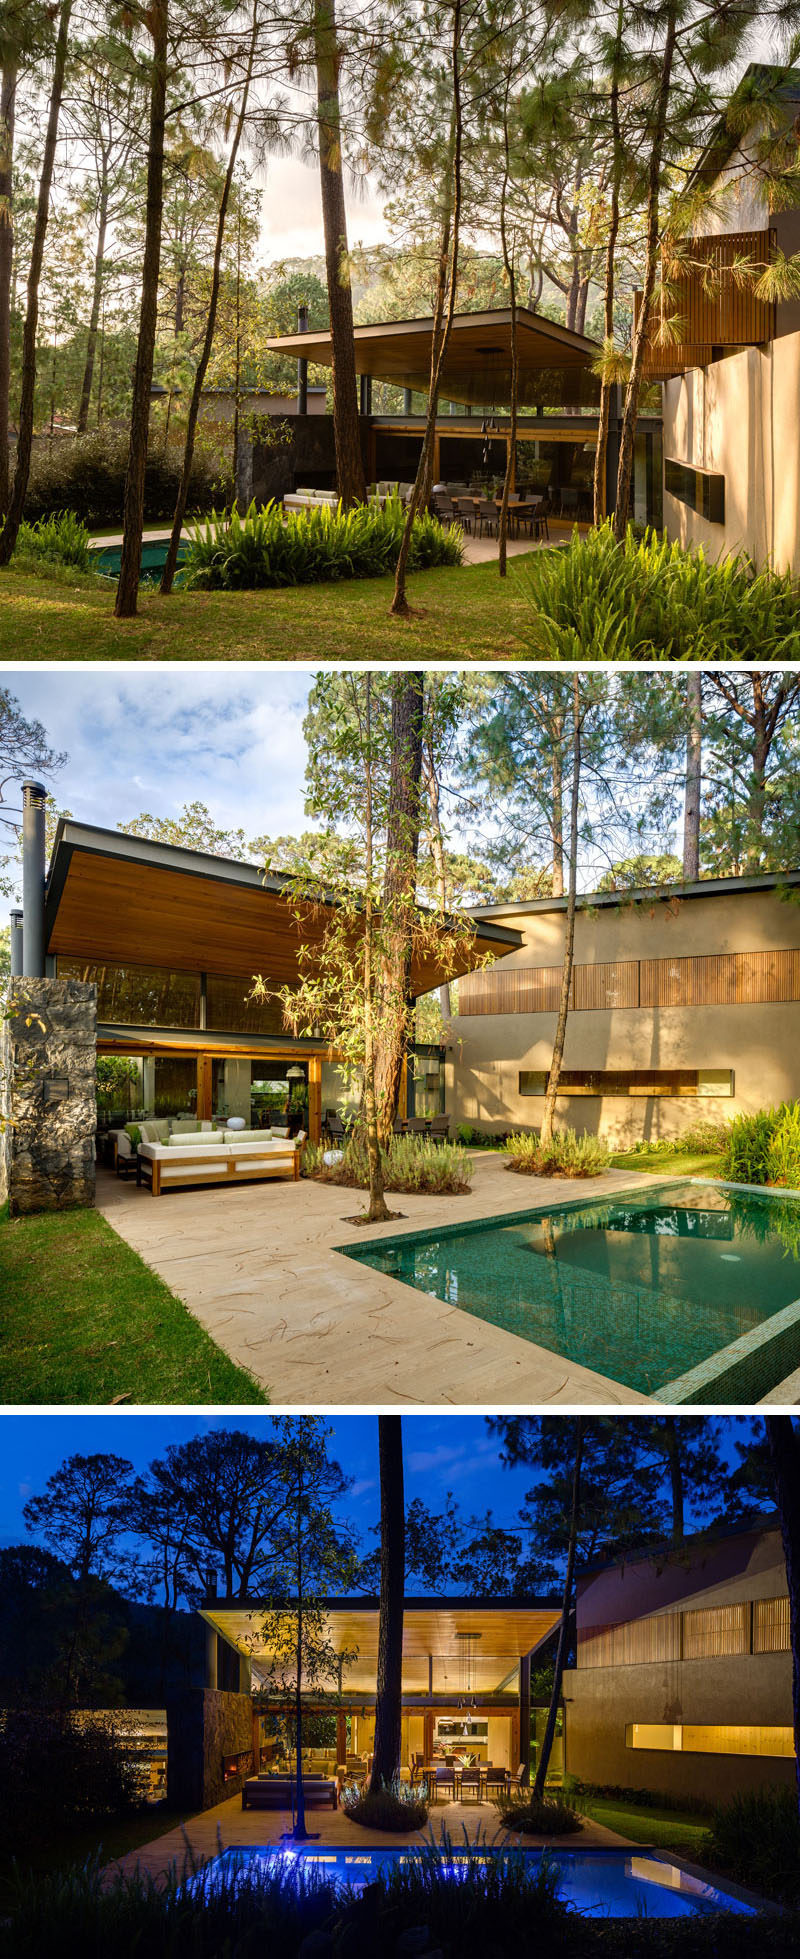 18 Modern House In The Forest // This house was part of a development designed to work with the environment instead of against it and to compliment the surrounding forest vegetation.